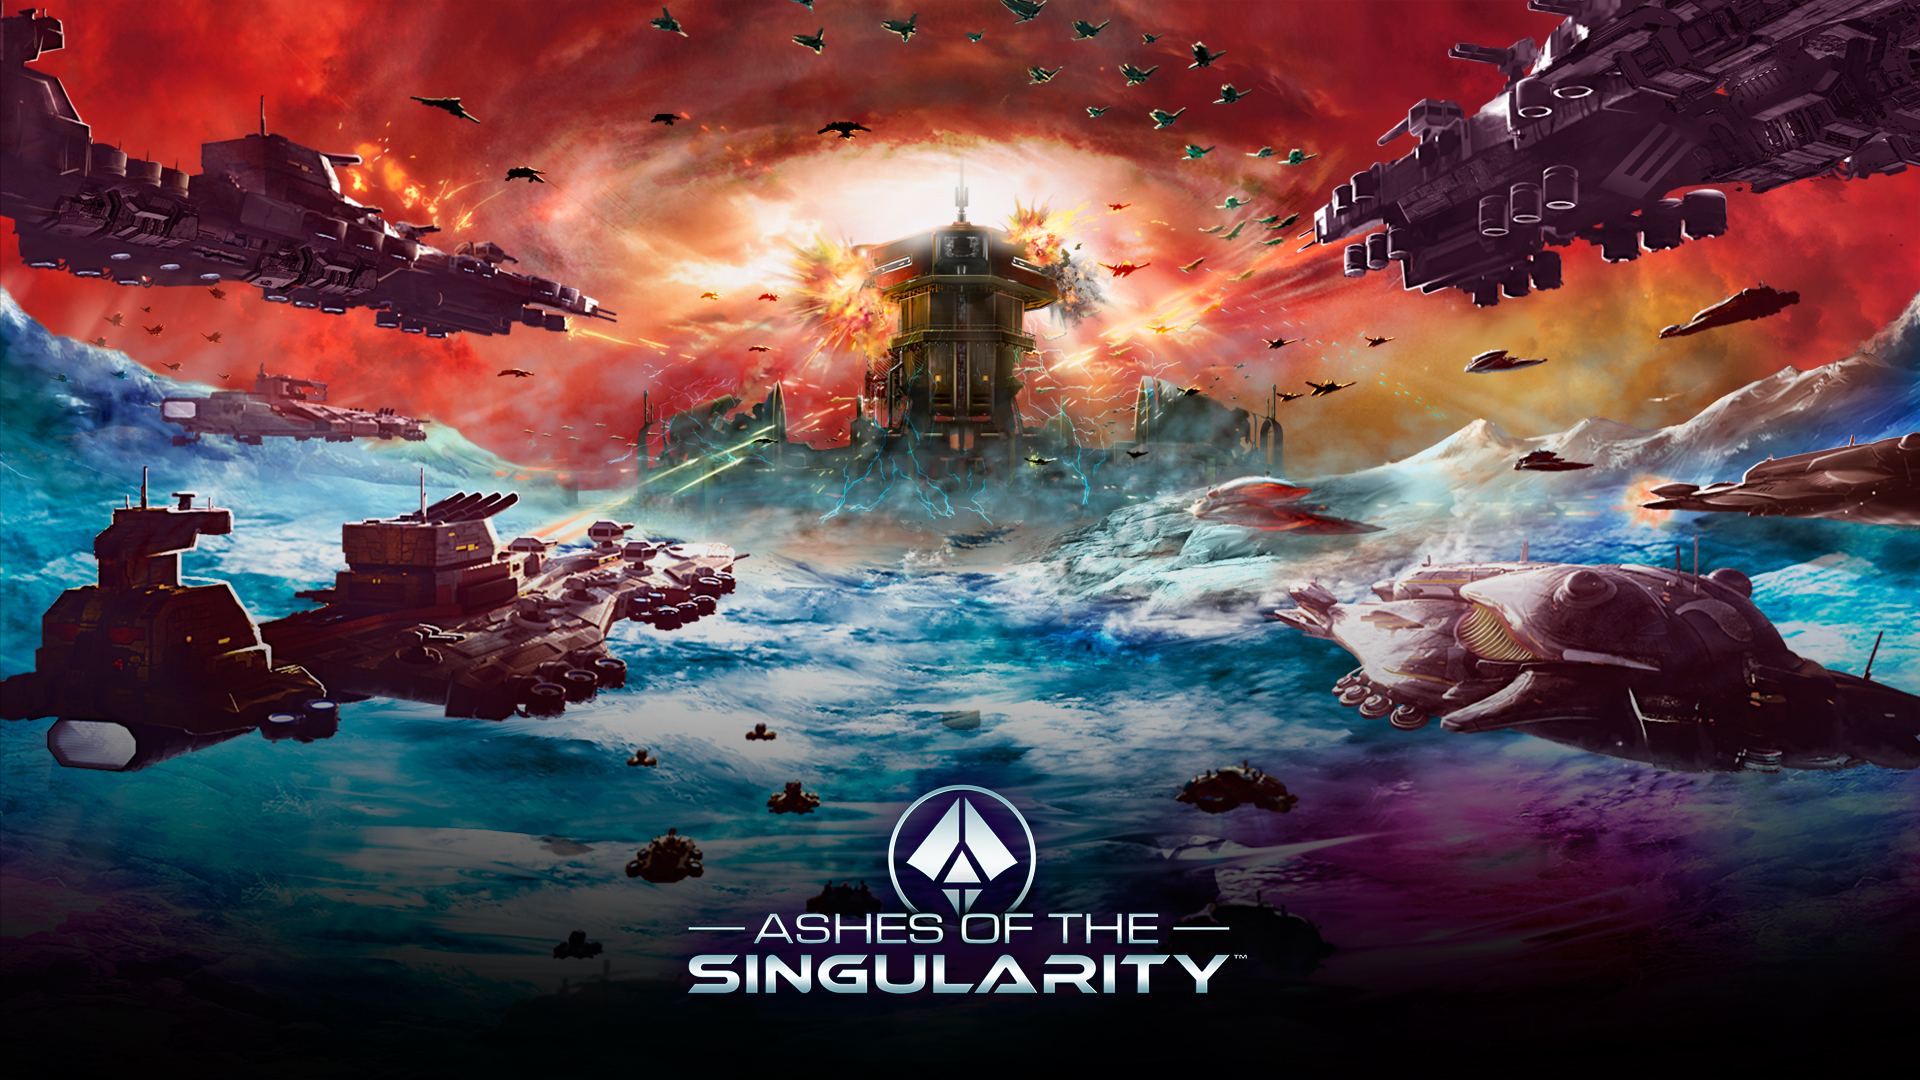 Download Ashes of the Singularity Completo Para Pc x64 6